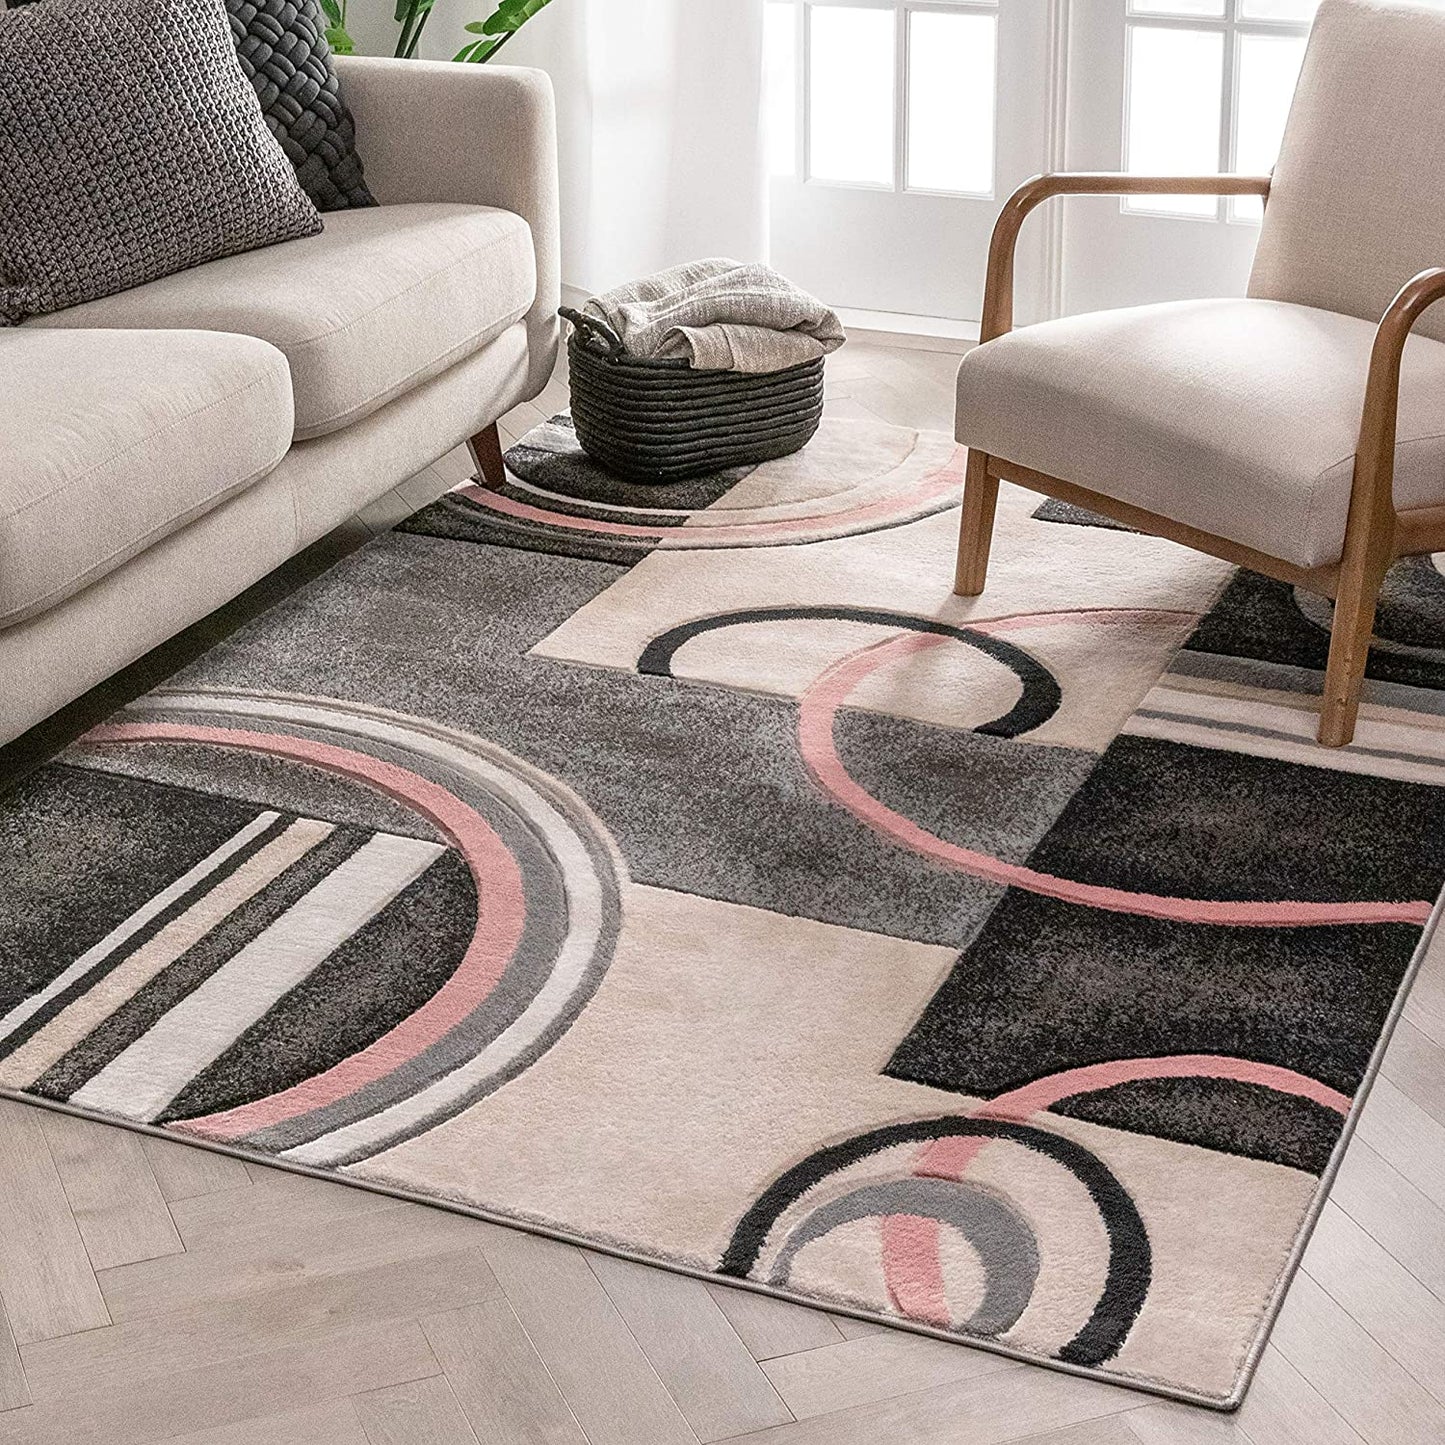 Good Vibes Belle Blush Pink Modern Abstract Geometric 3D Textured Soft Area Rug